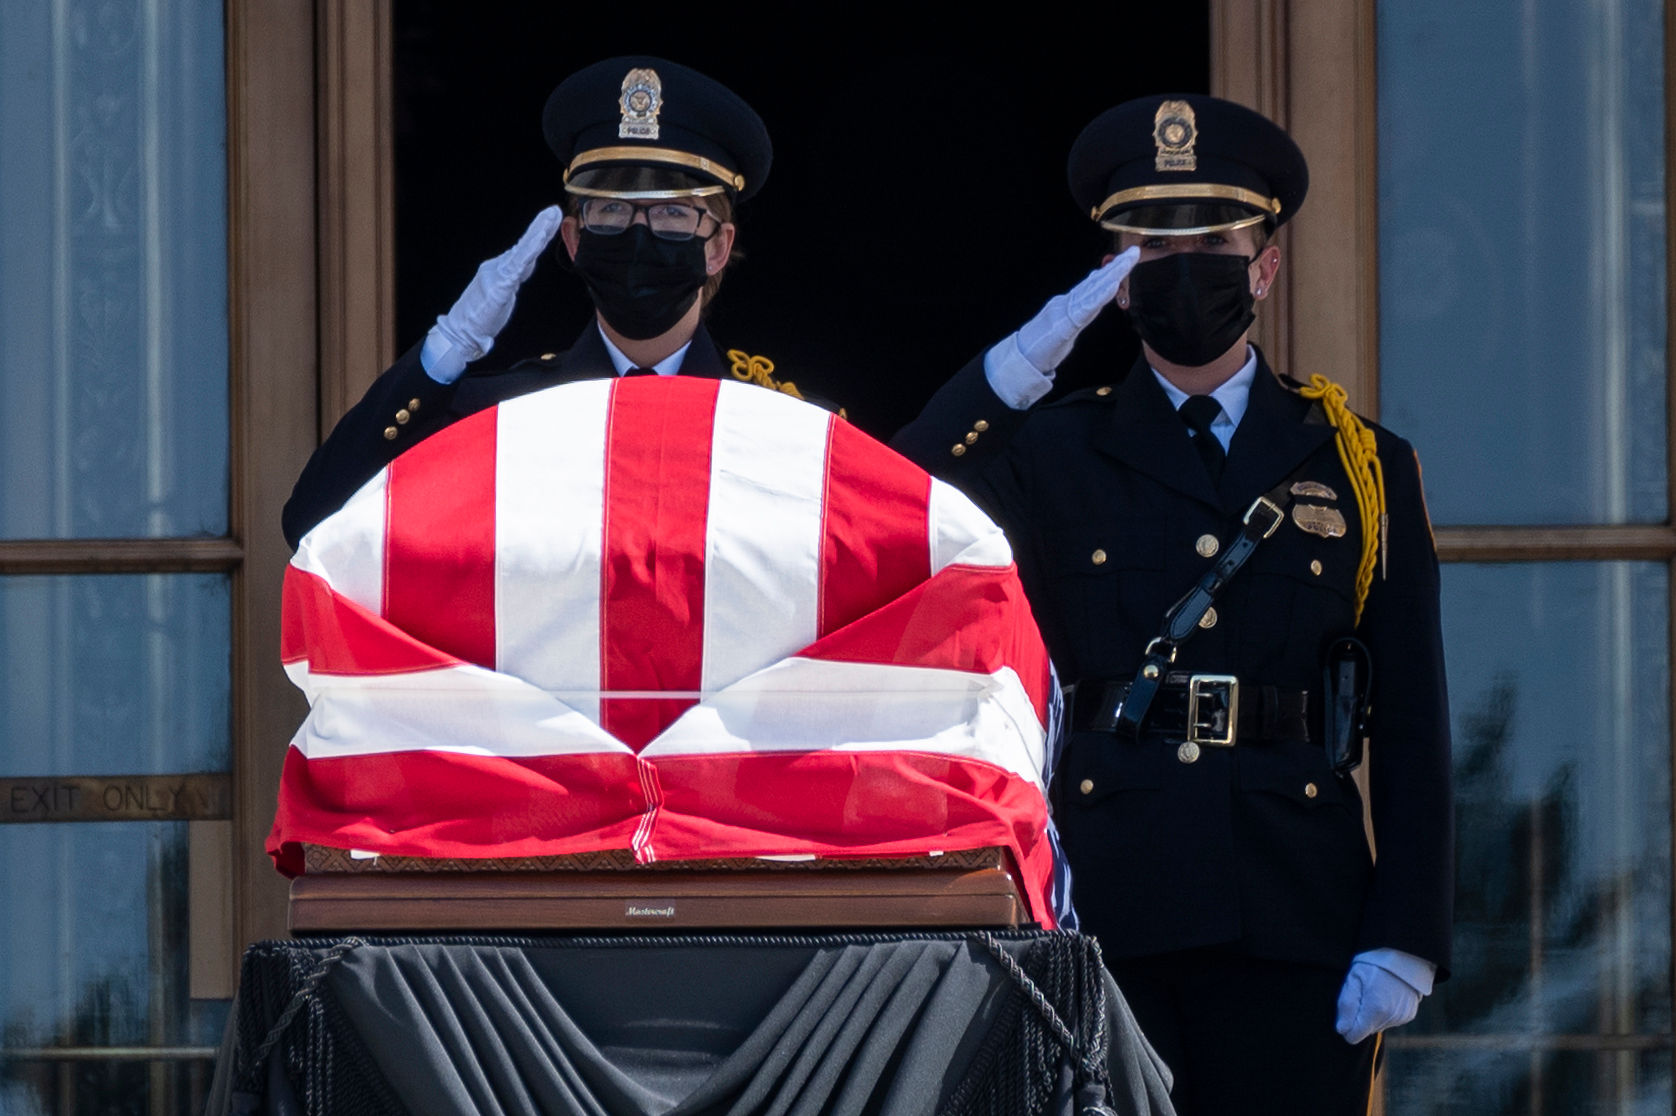 Late US justice Ruth Bader Ginsburg buried in private ceremony